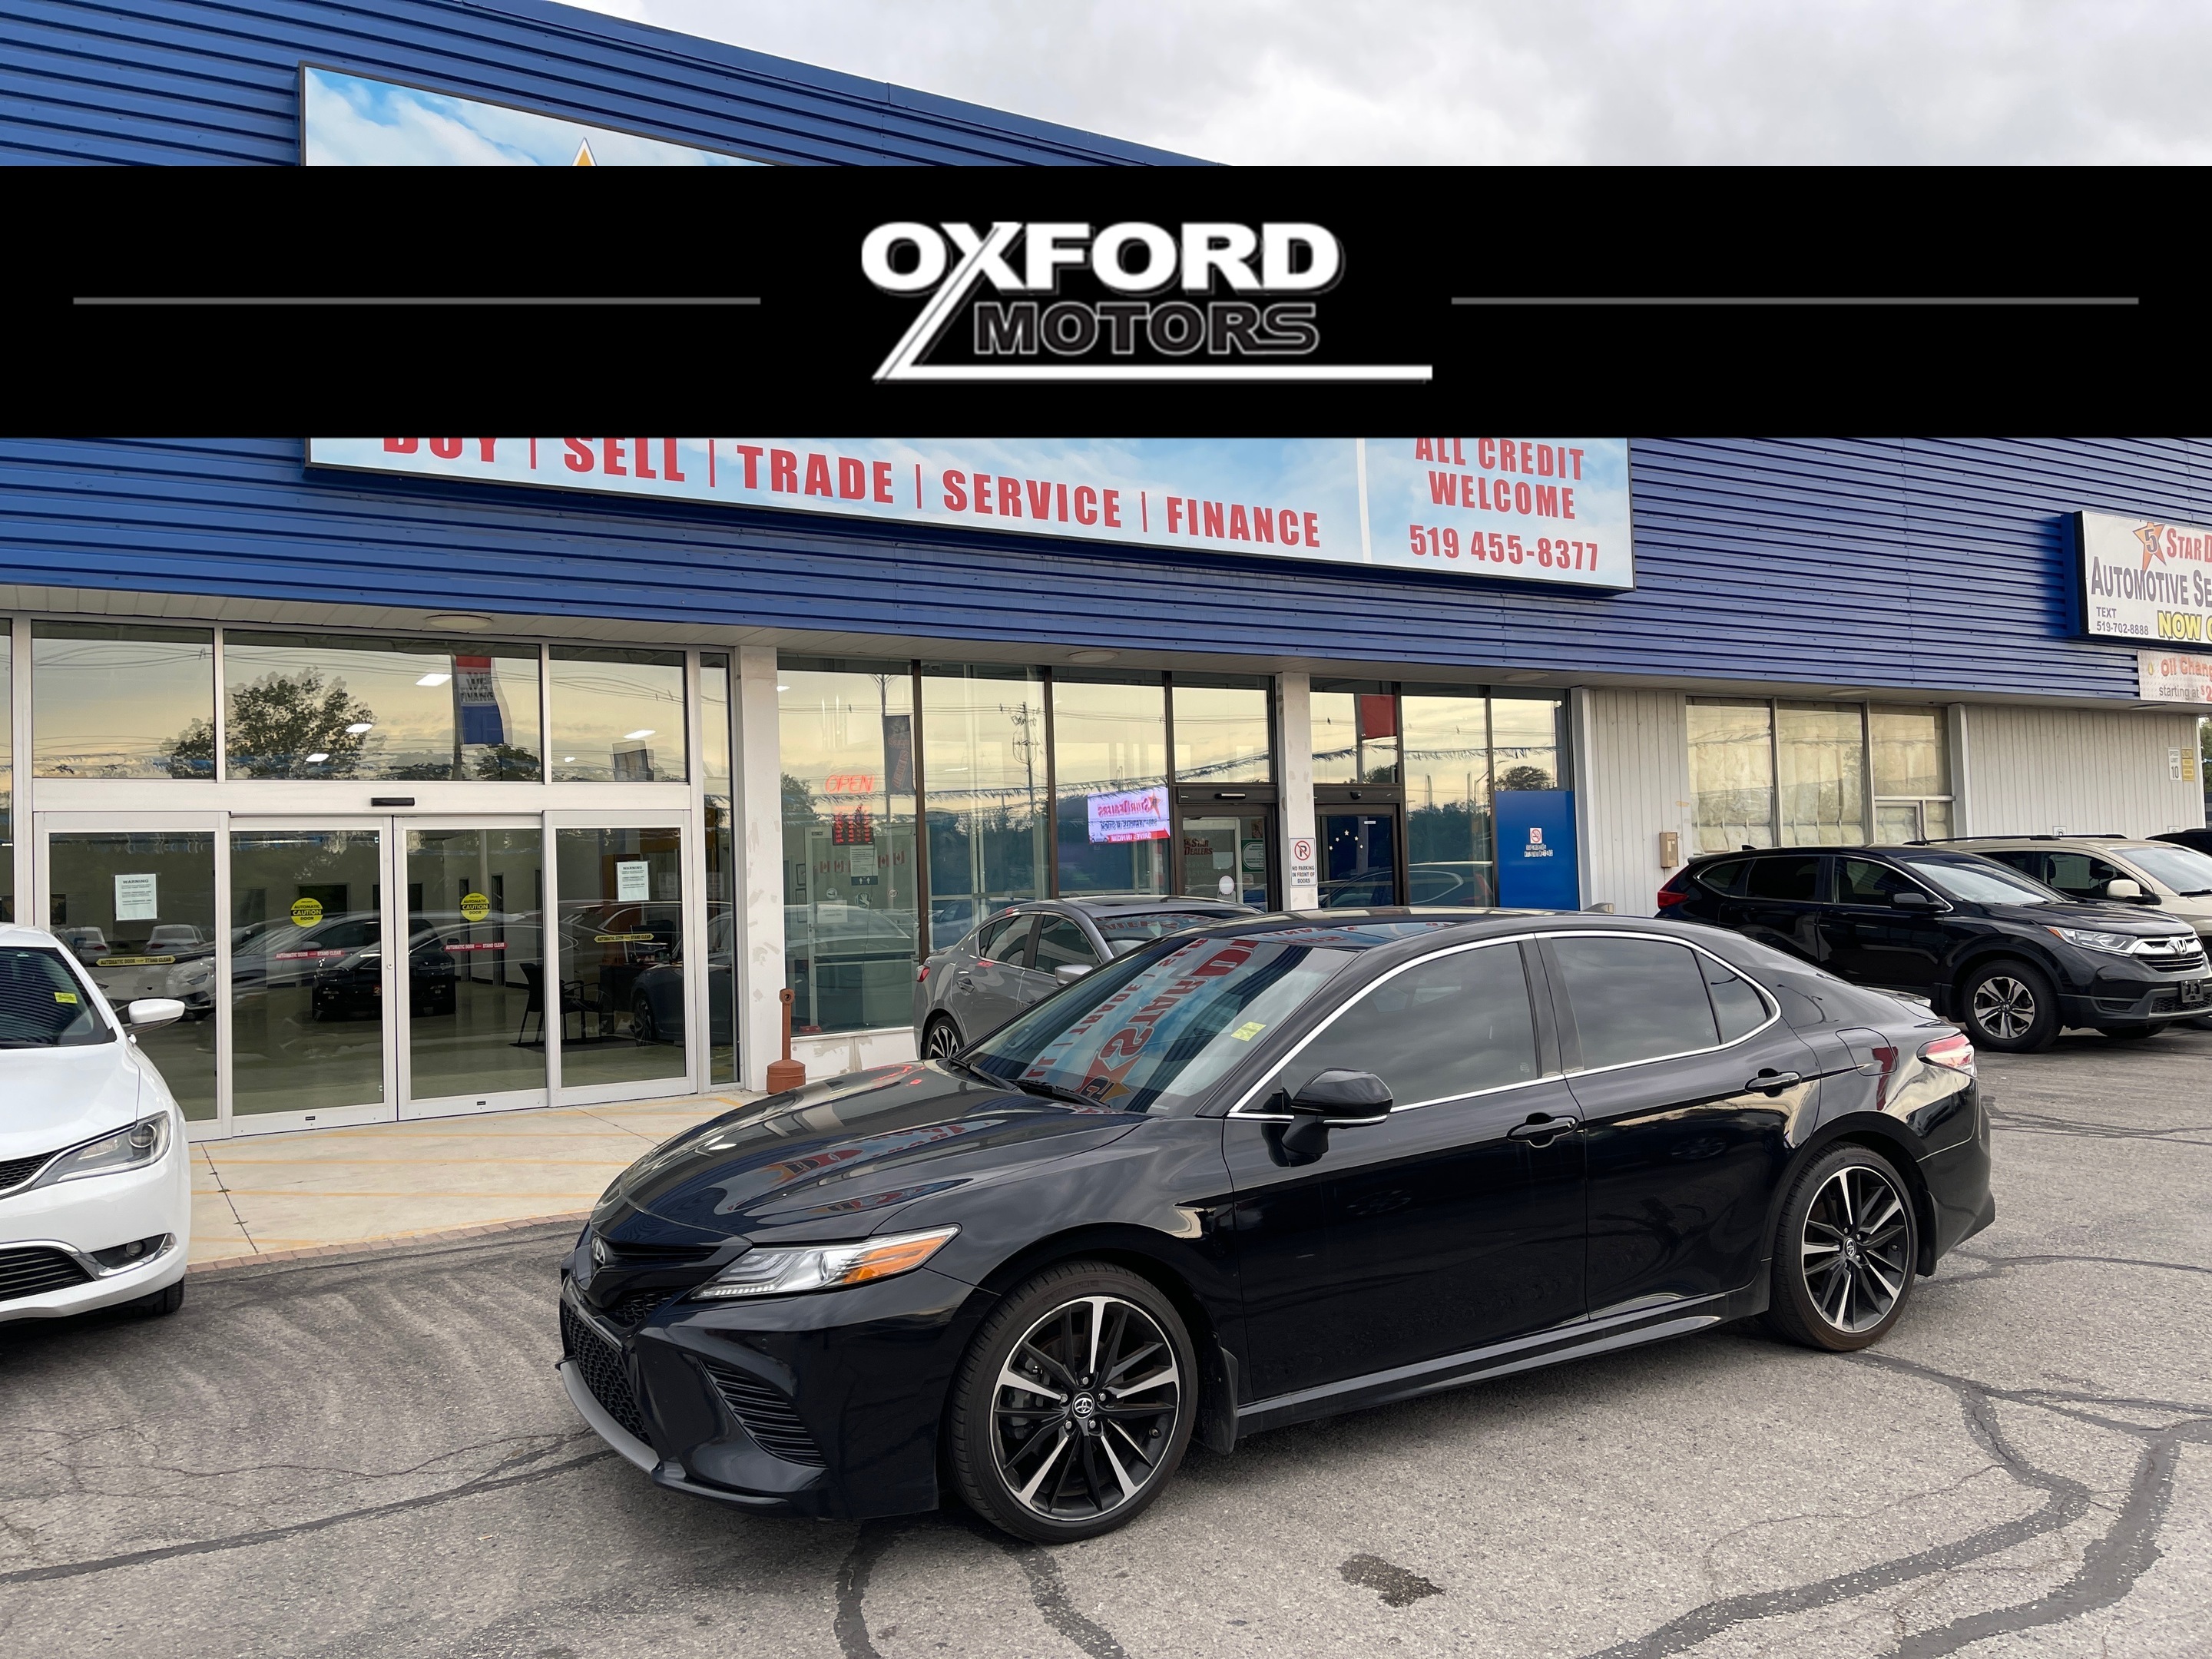 2018 Toyota Camry NAV LEATHER SUNROOF MINT! WE FINANCE ALL CREDIT!